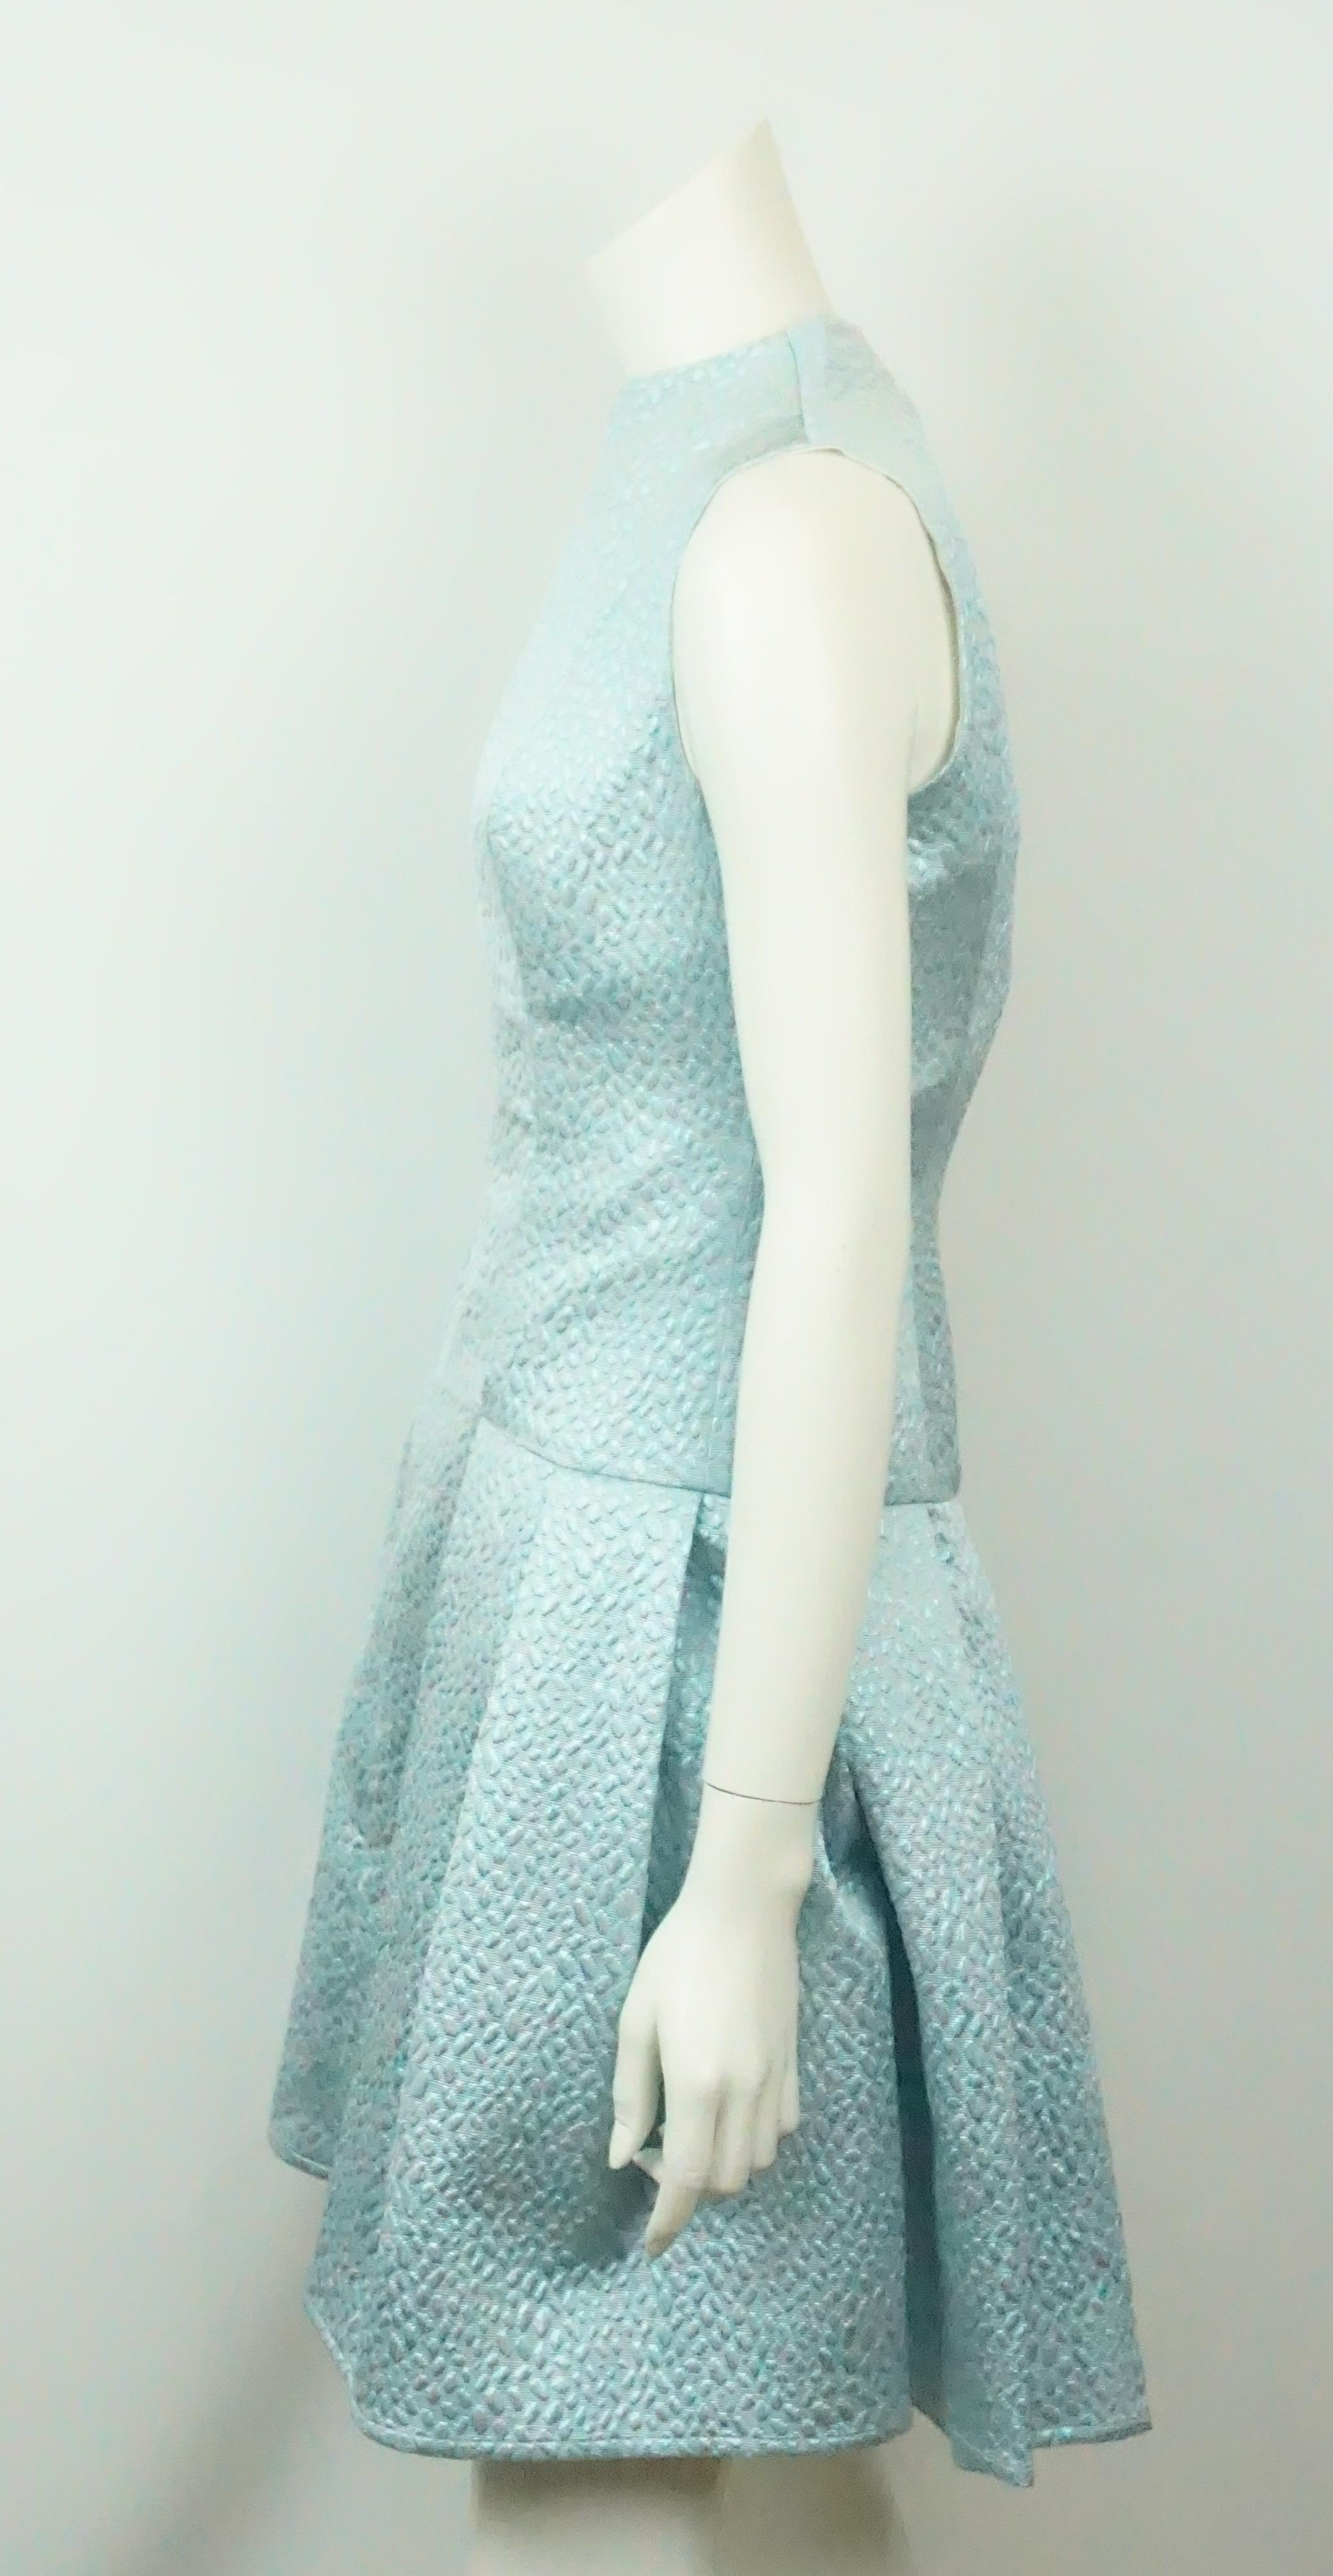 Joanna Mastroianni Mint Brocade Dress N/S-2. This fabulous sleeveless dress is in excellent condition. It is a light blue minty color. There is no sign of wear. The dress has a silver metallic detailed pattern. It has a front zip w/ a high neckline